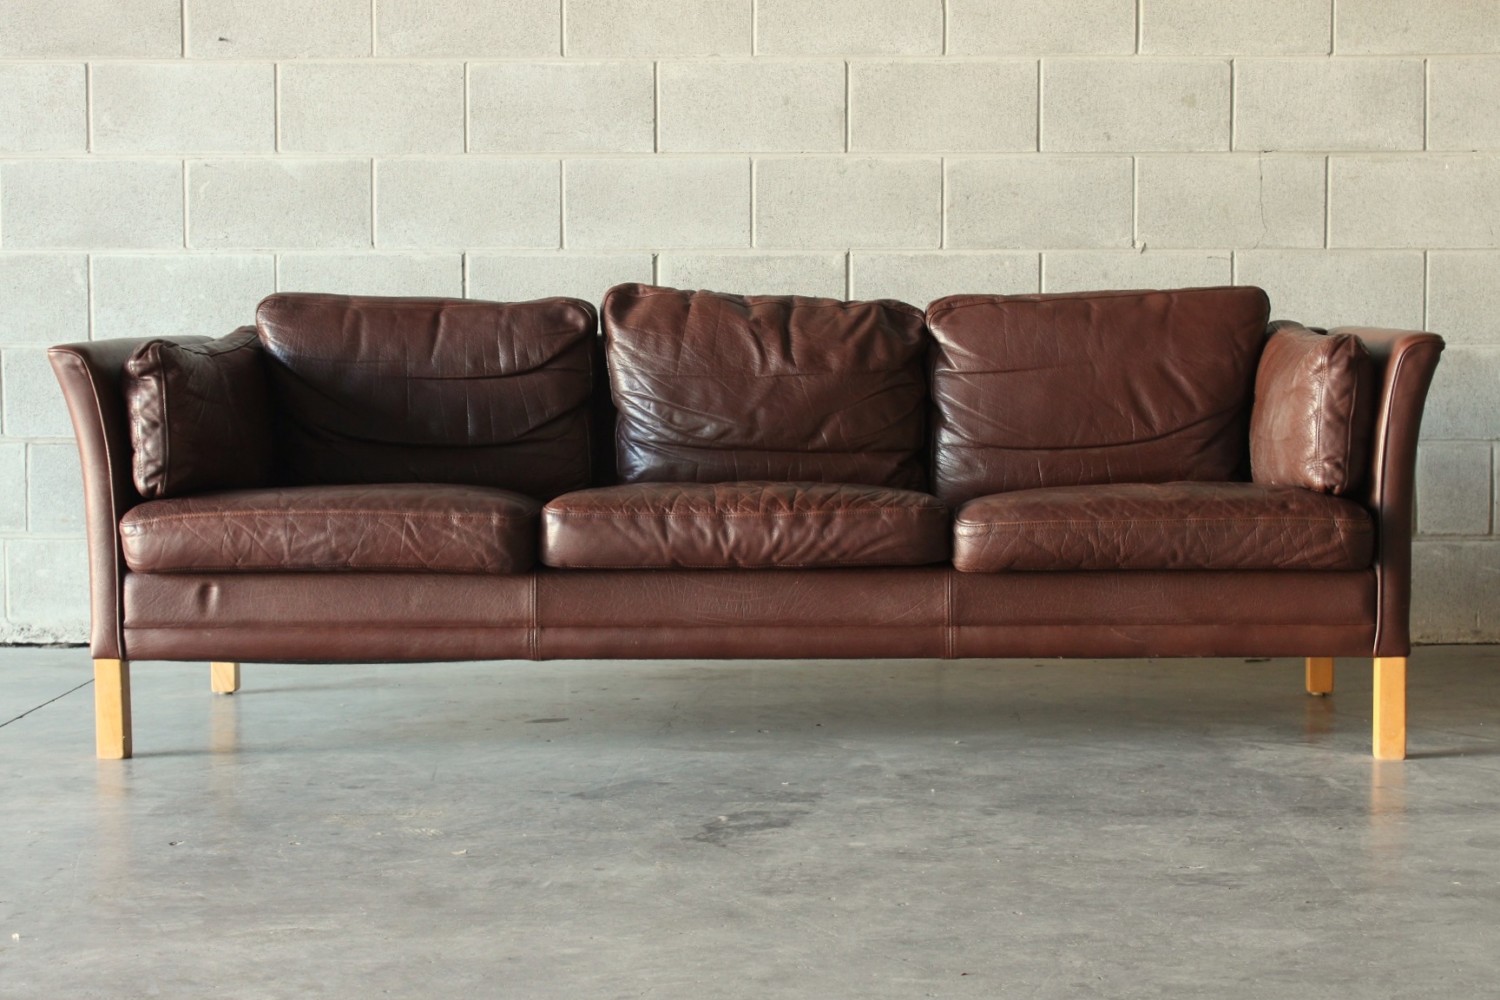 3 + 2 Brown Leather Sofas